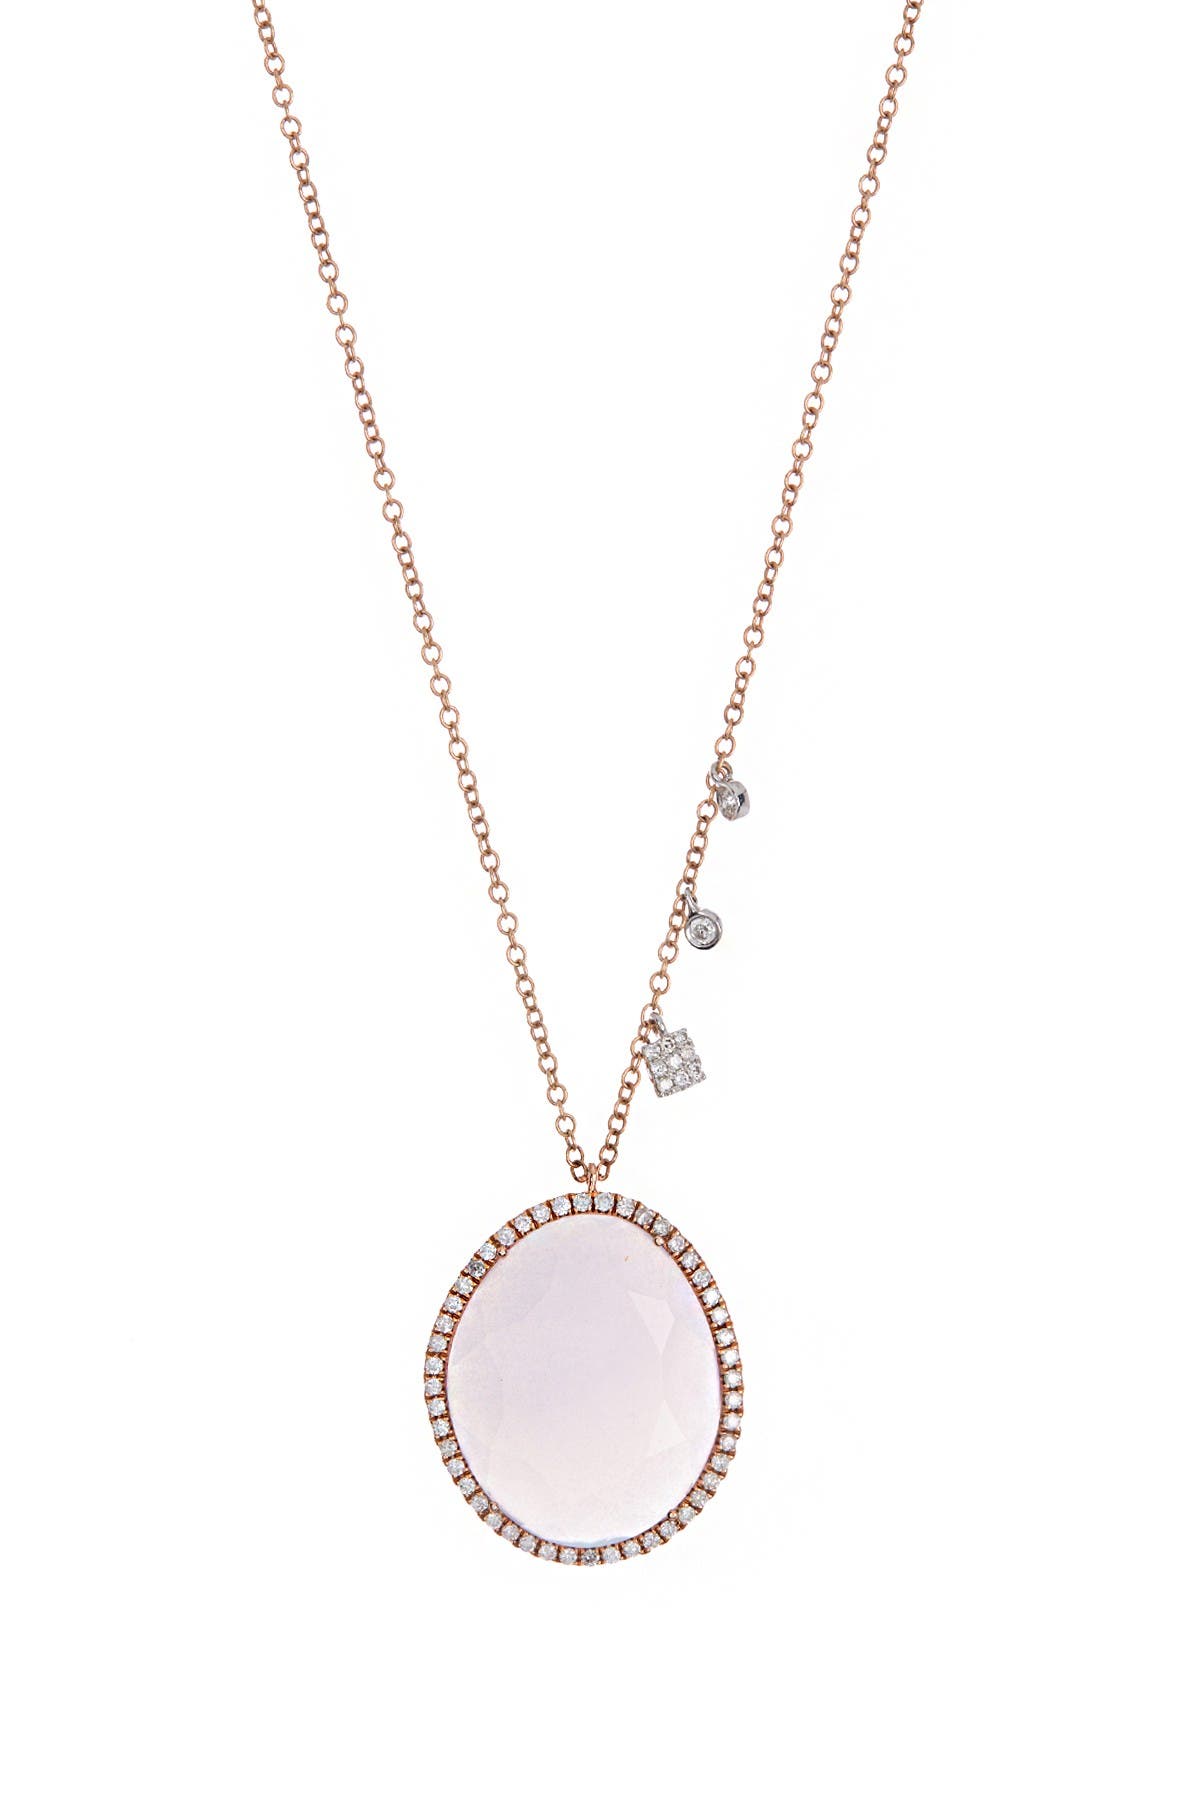 Meira T 14k Rose Gold Chalcedony & Pave Diamond Halo Pendant Necklace In Pink